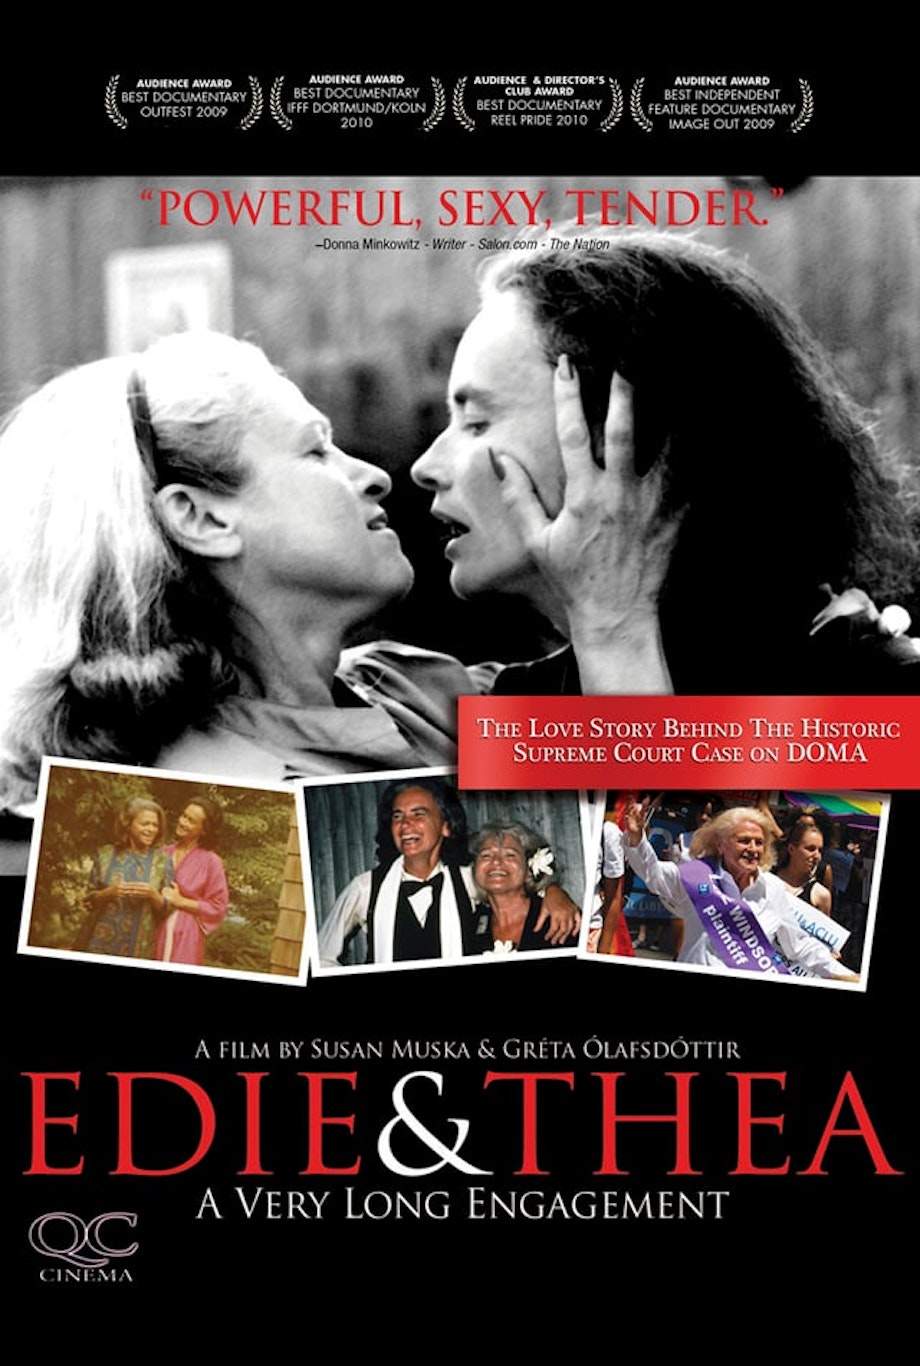 Edie & Thea: A Very Long Engagement